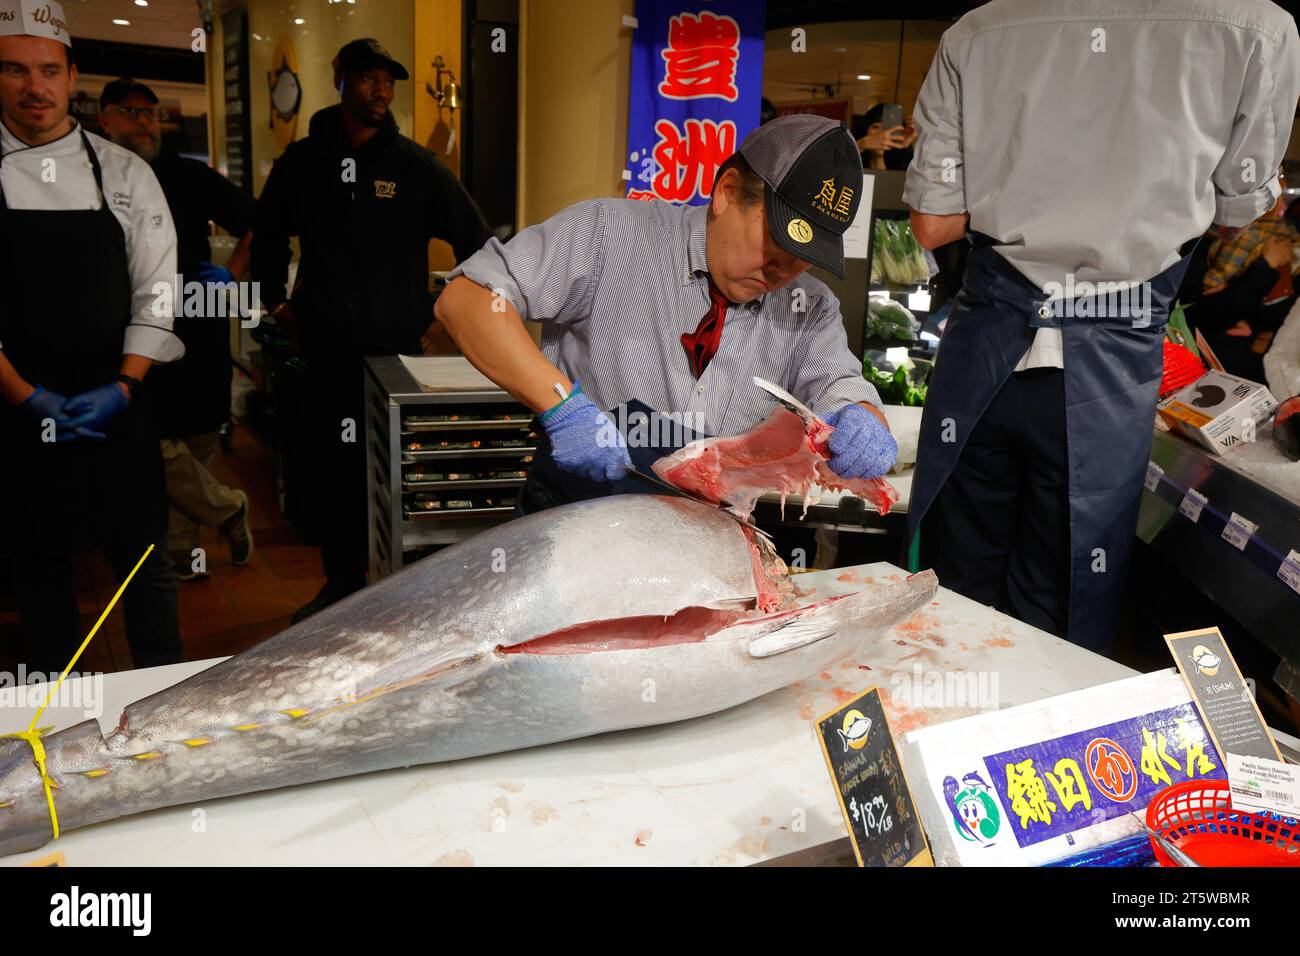 05 November 2023, New York. A Japanese expert fishmonger cutting the jaw and collar (kama) off a small wild caught MSC Atlantic Bluefin Tuna (Thunnus thynnus) hon maguro at the Sakanaya fish market inside Wegmans Astor Place. The fish counter features domestic fresh fish and seafood, and Japanese fish imported from Tokyo's Toyosu Fish Market. Stock Photo